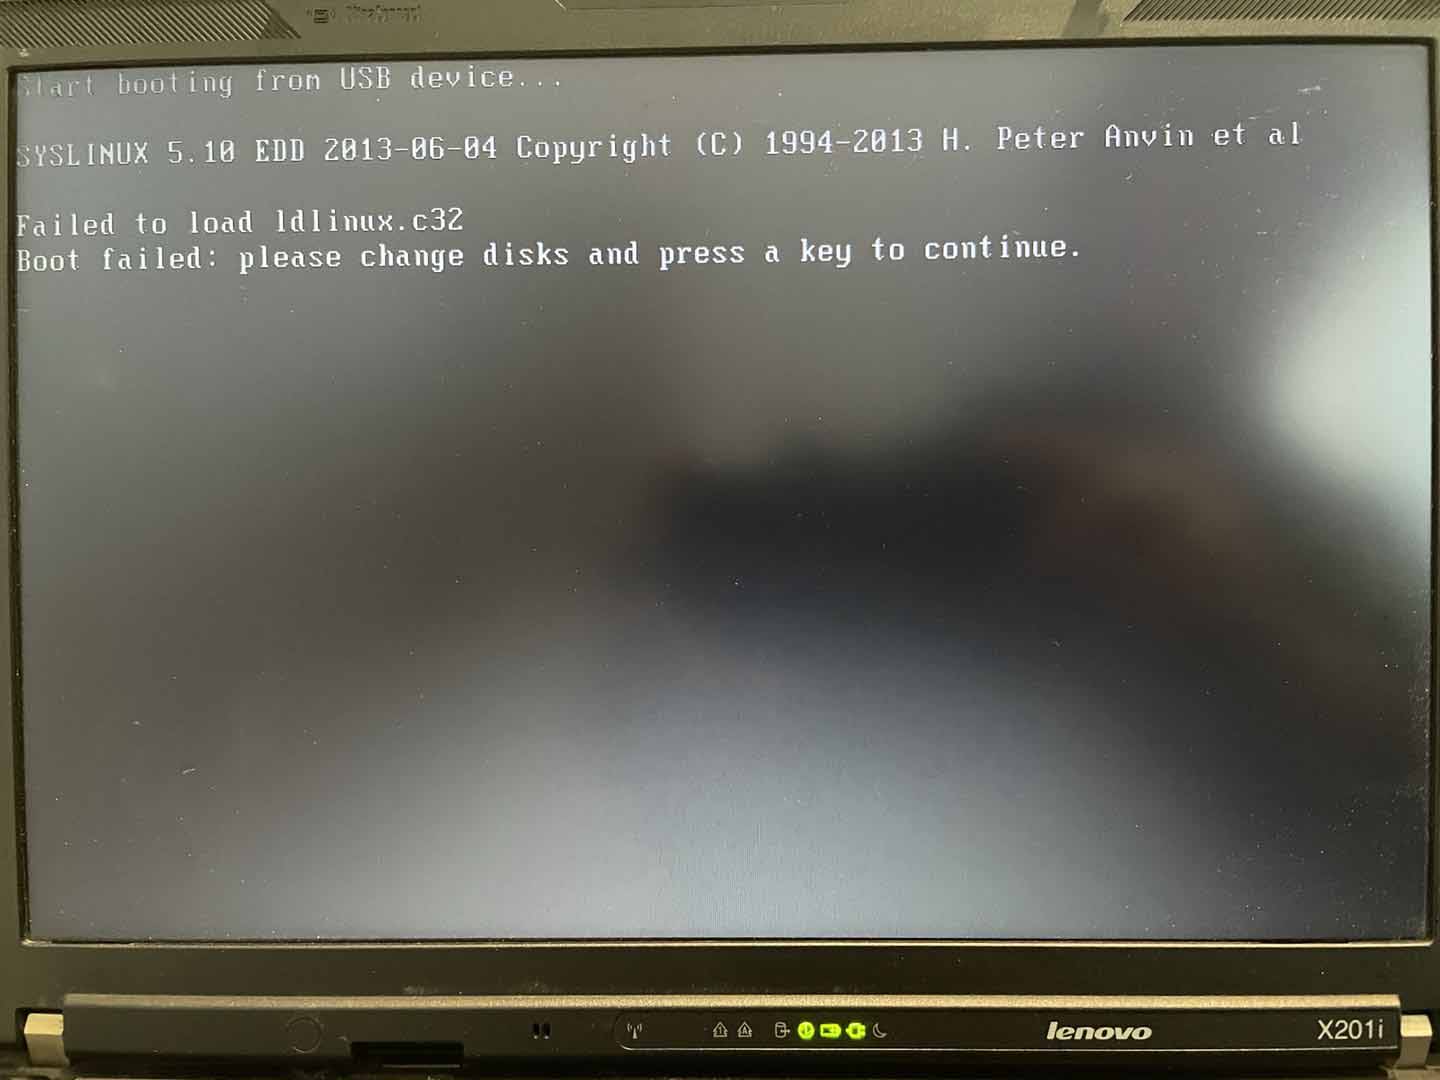 Fail to boot